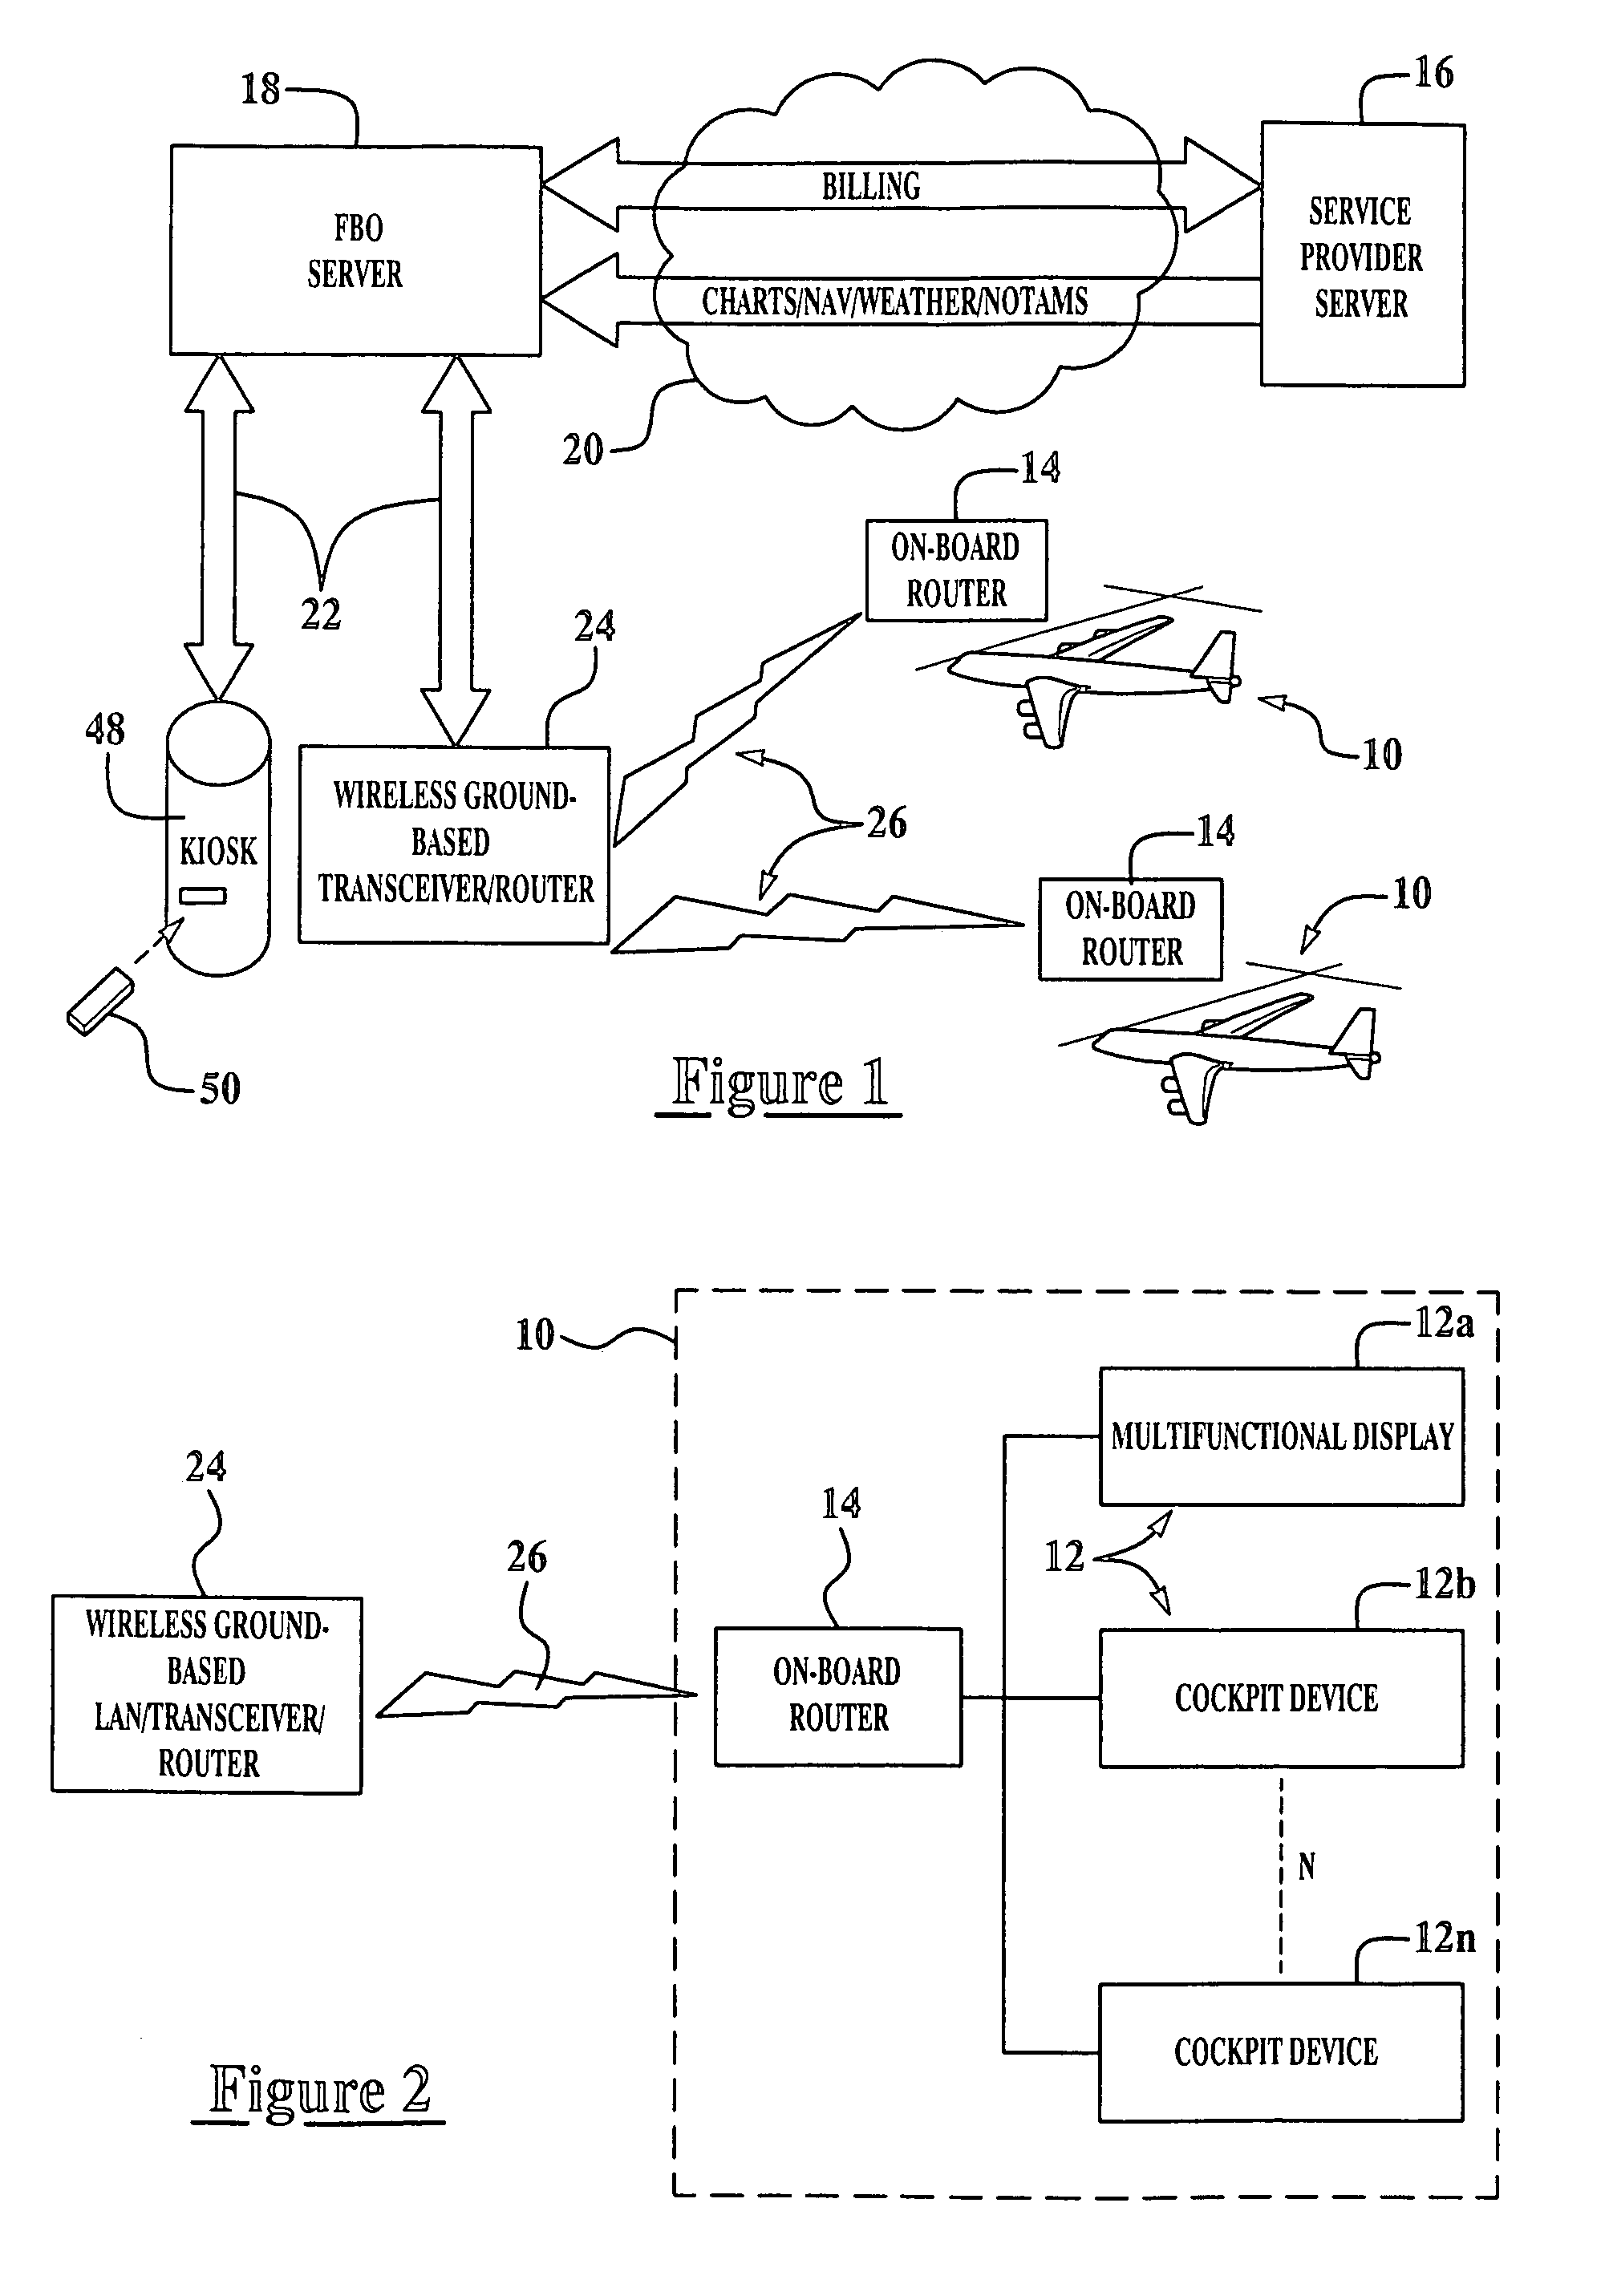 Automated delivery of flight data to aircraft cockpit devices